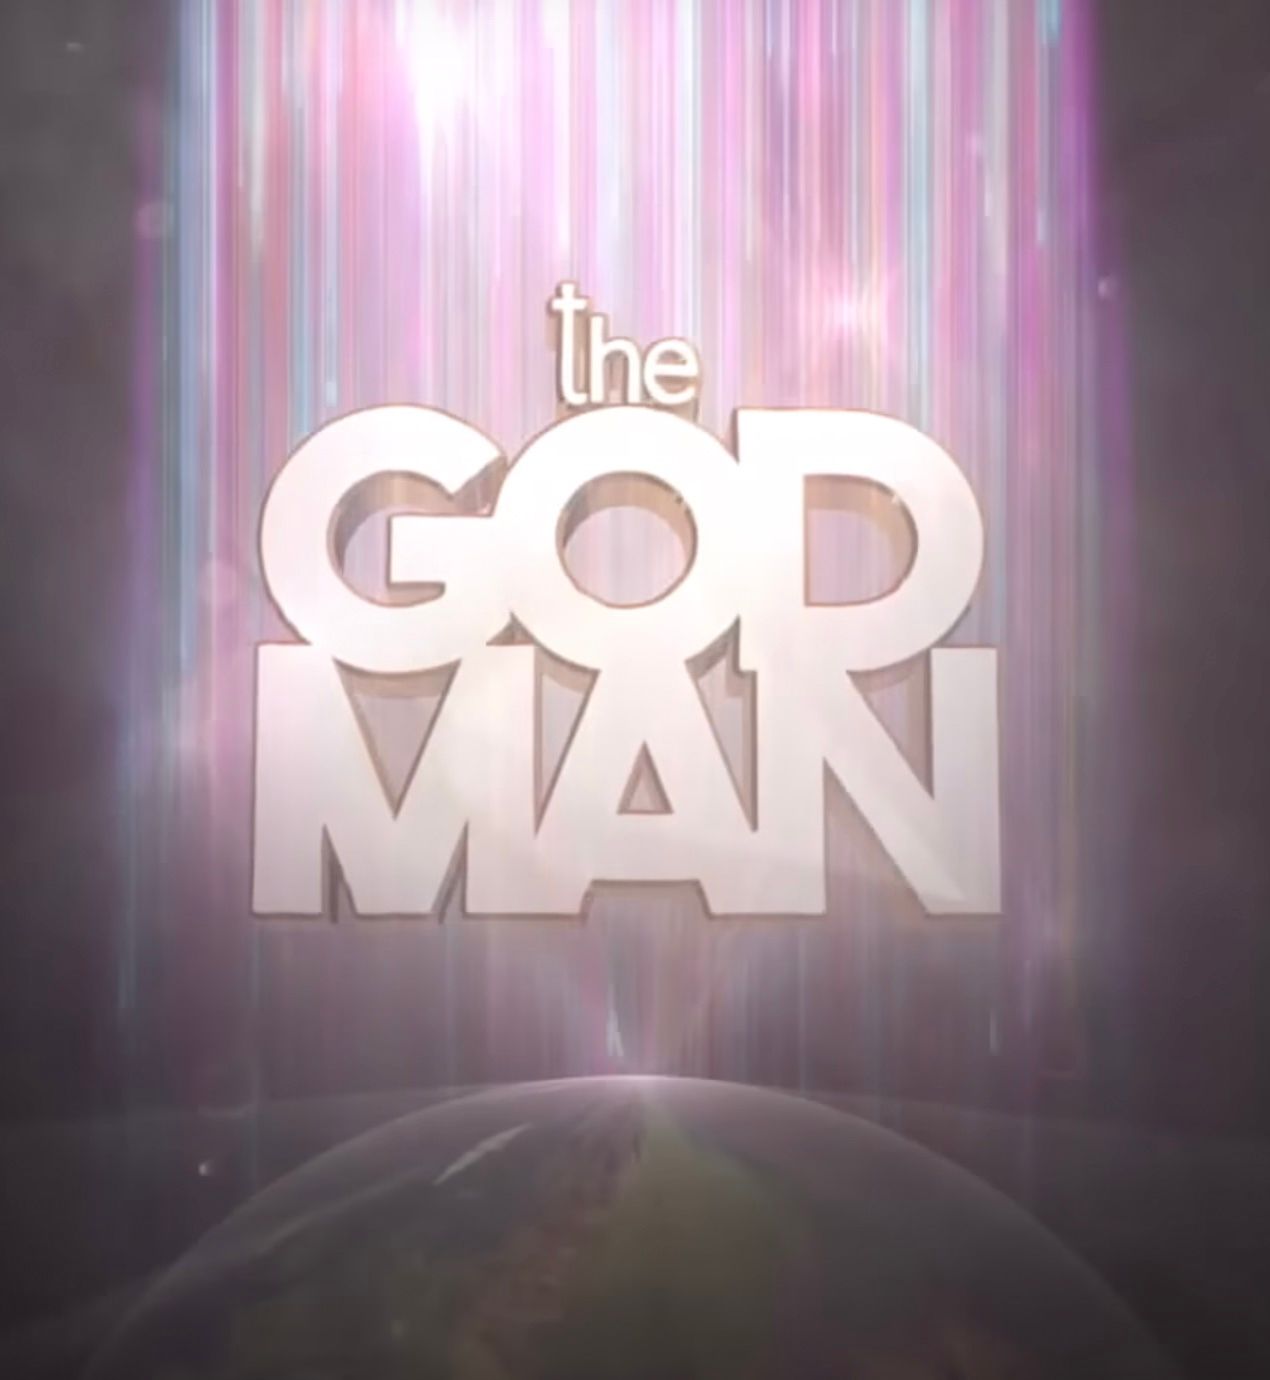 See Darren Wilson's "The God Man," the Final Installment of His Film Series About the Nature of God